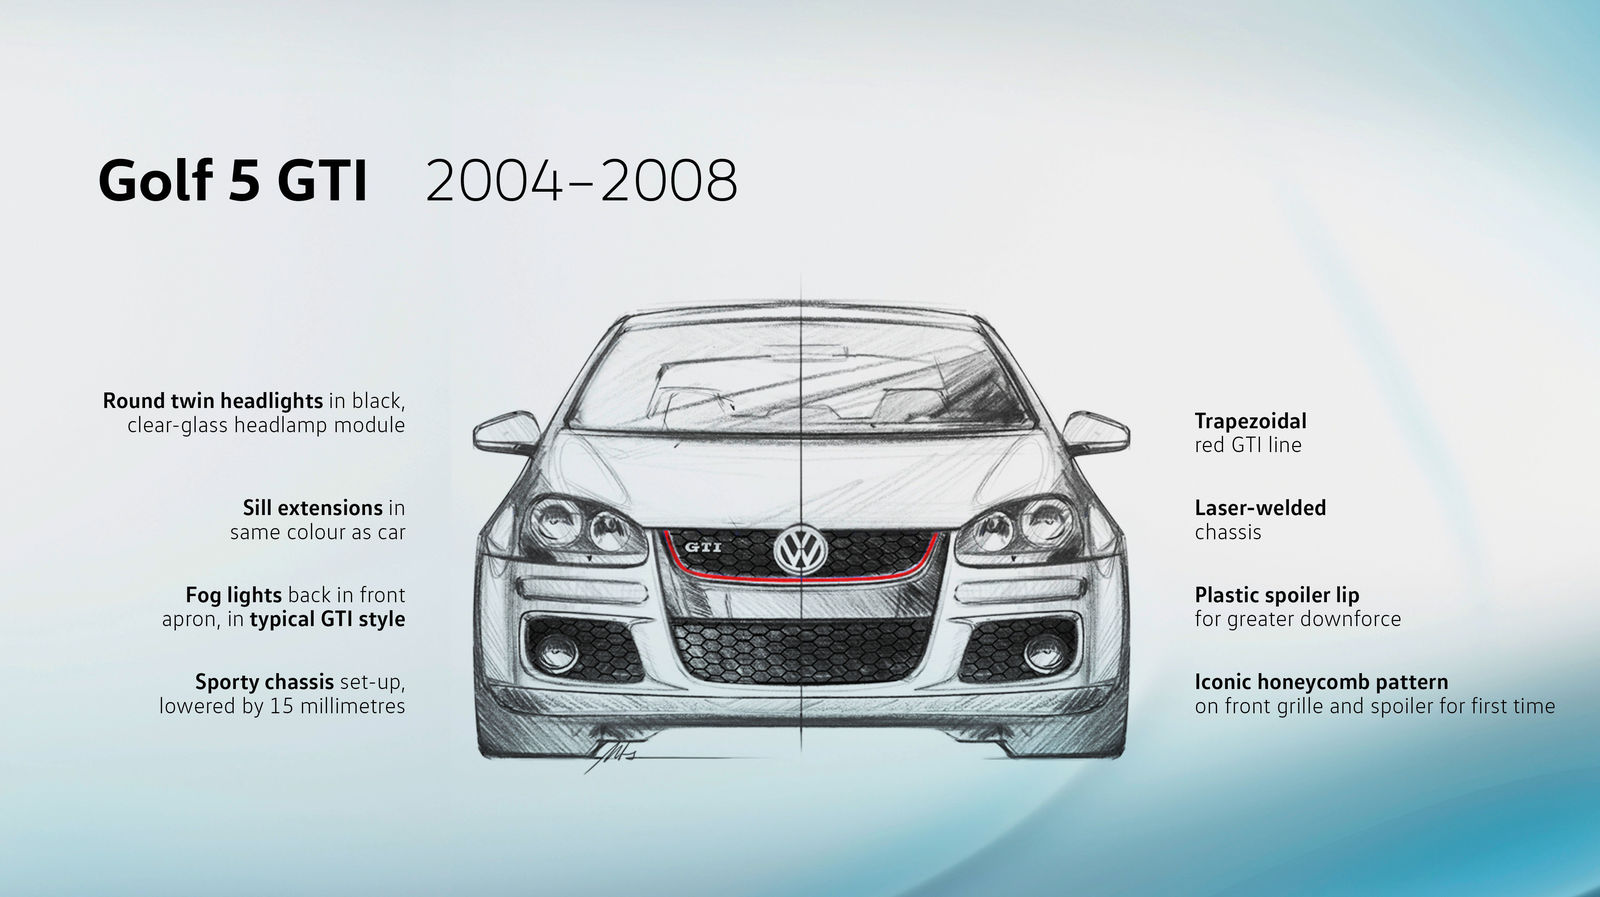 Story: ““Golf GTI – eight generations, each with that distinctive front”